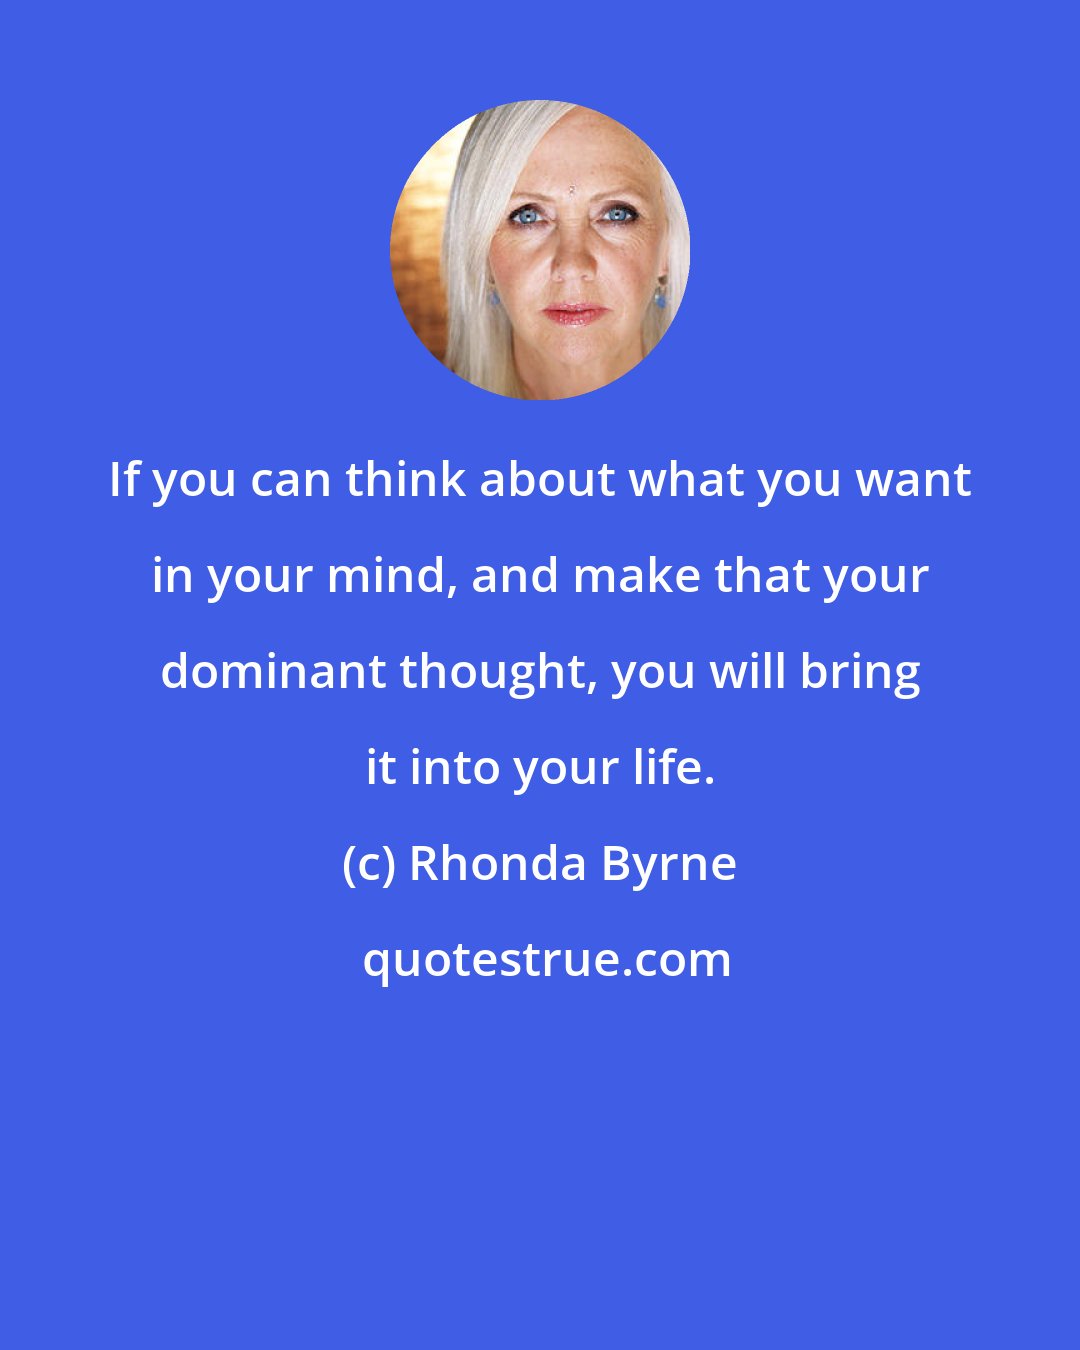 Rhonda Byrne: If you can think about what you want in your mind, and make that your dominant thought, you will bring it into your life.